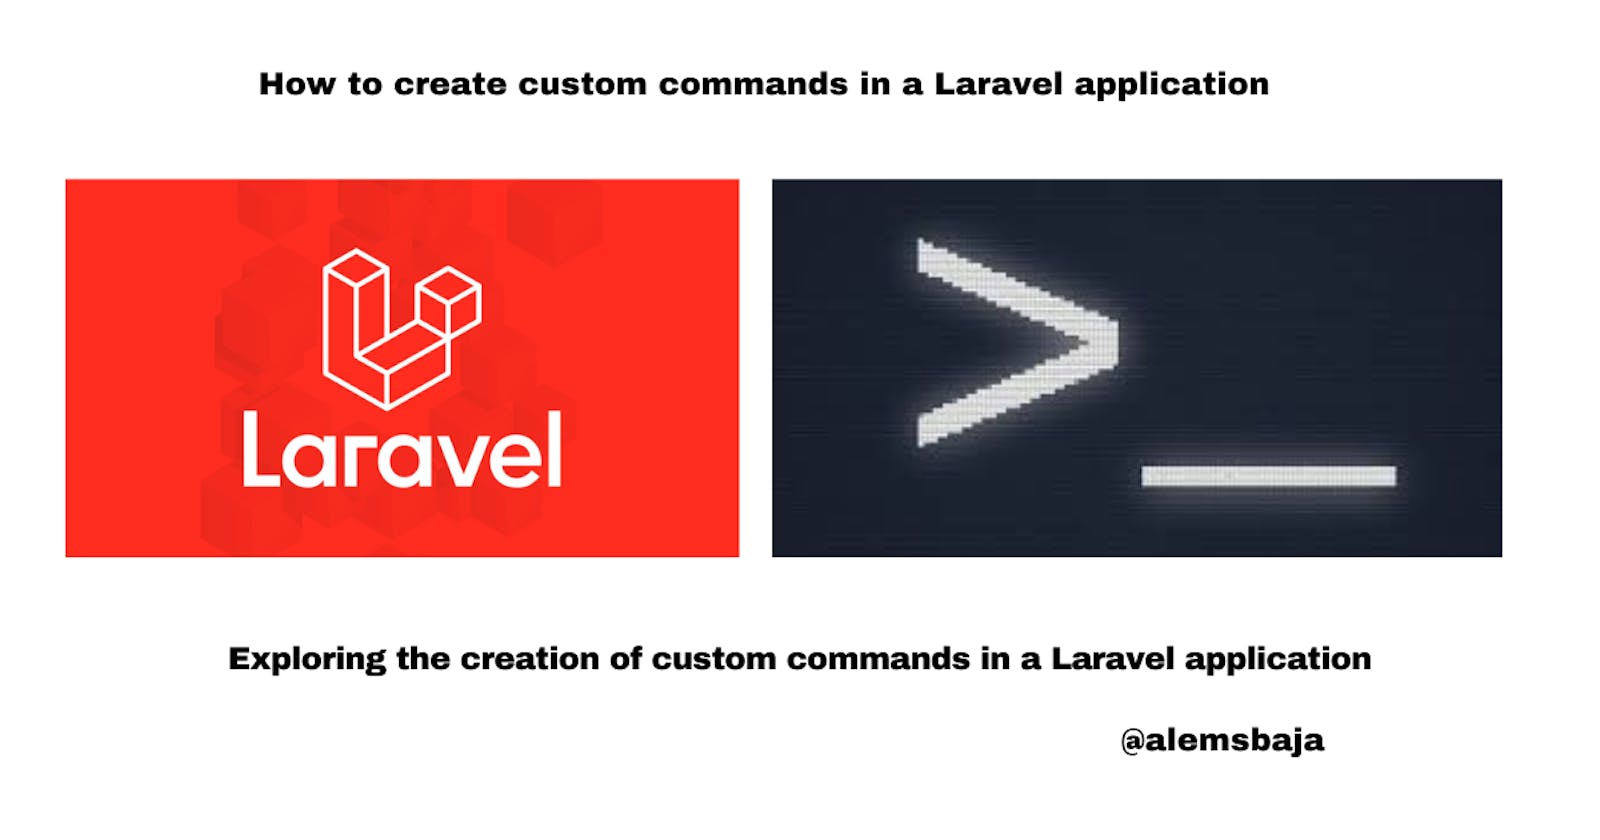 How to create custom commands in a Laravel application